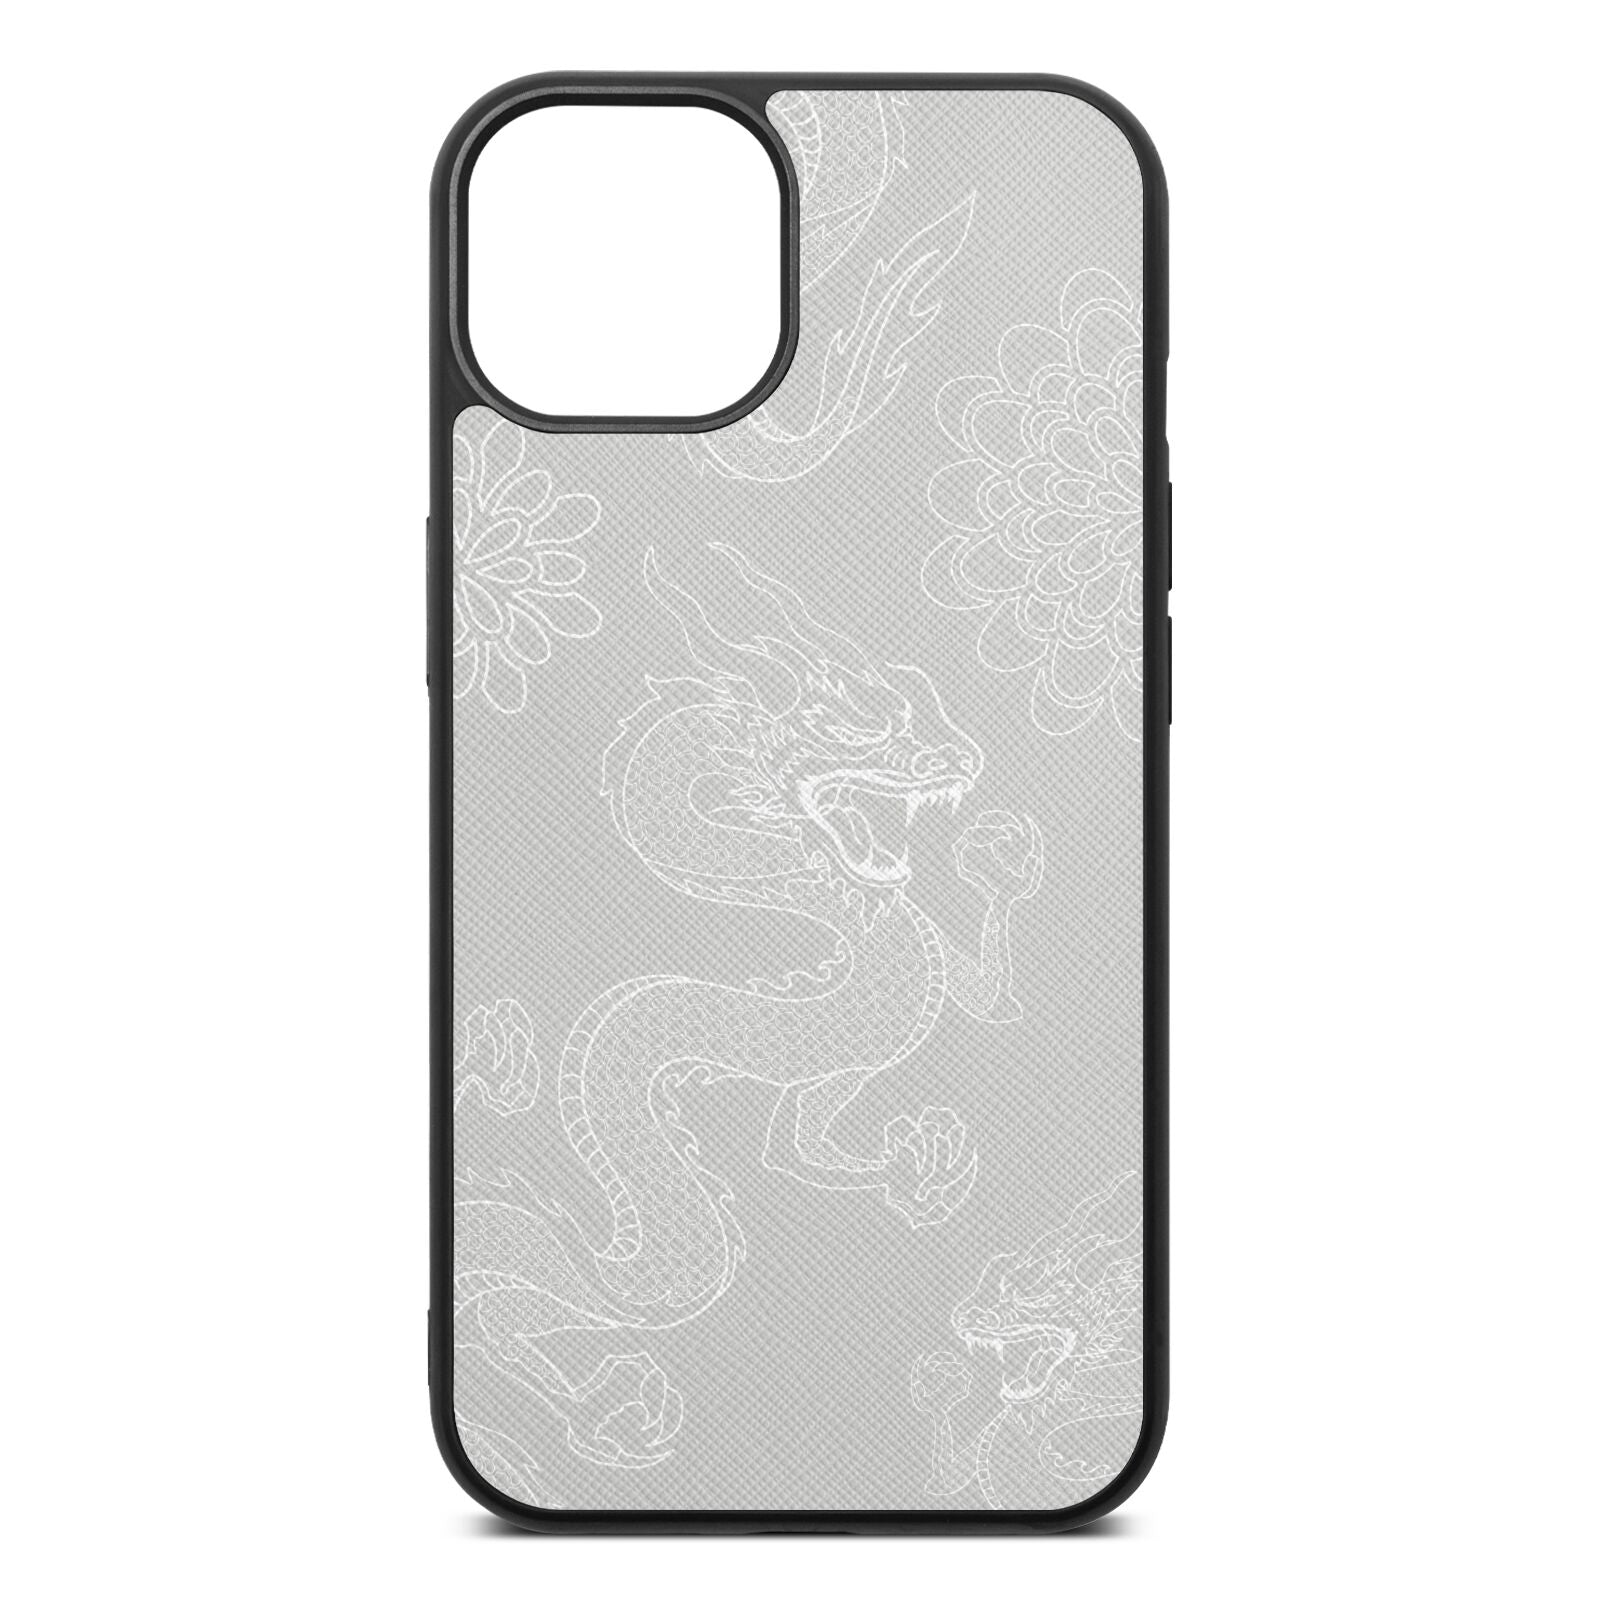 Dragons Silver Saffiano Leather iPhone 13 Case